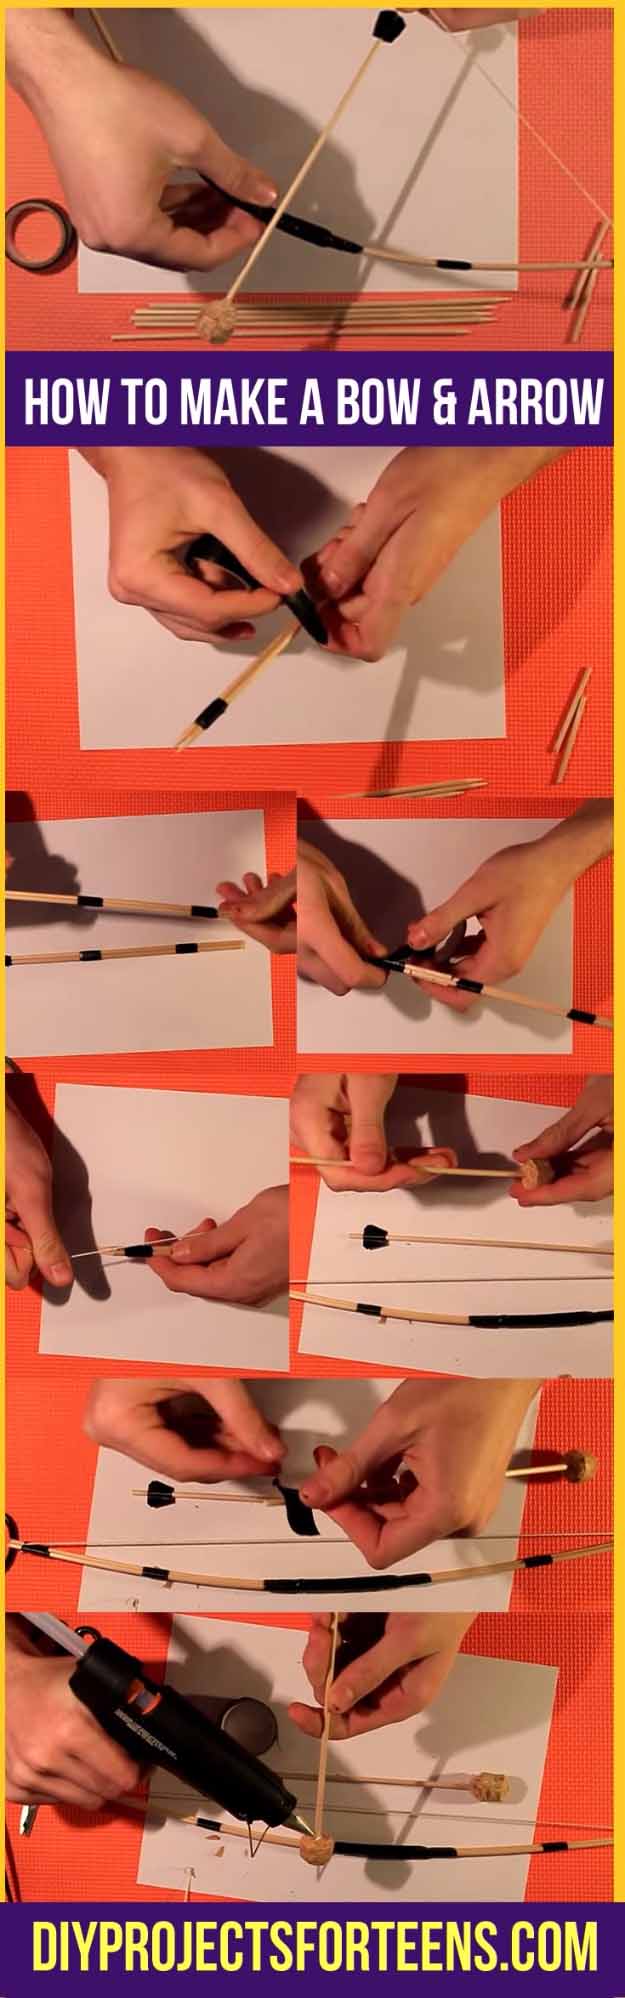 Cool Crafts You Can Make for Less than 5 Dollars | Cheap DIY Projects Ideas for Teens, Tweens, Kids and Adults | Make A DIY Mini Bow and Arrow #teencrafts #cheapcrafts #crafts/